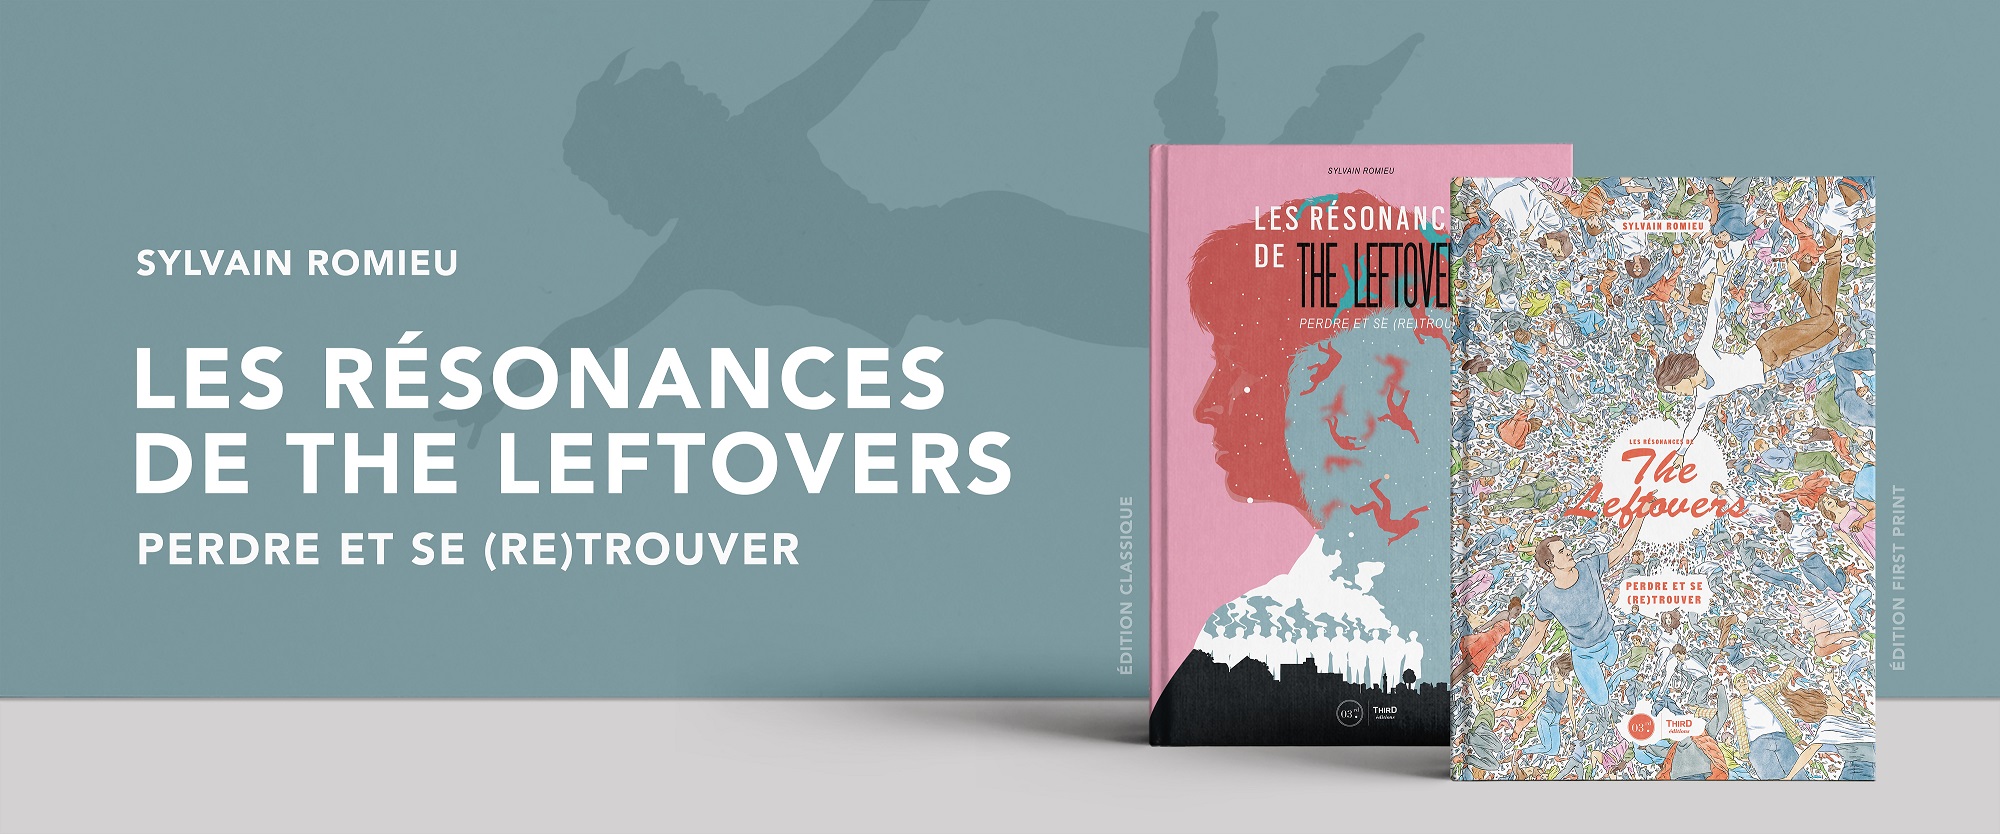 the leftovers book